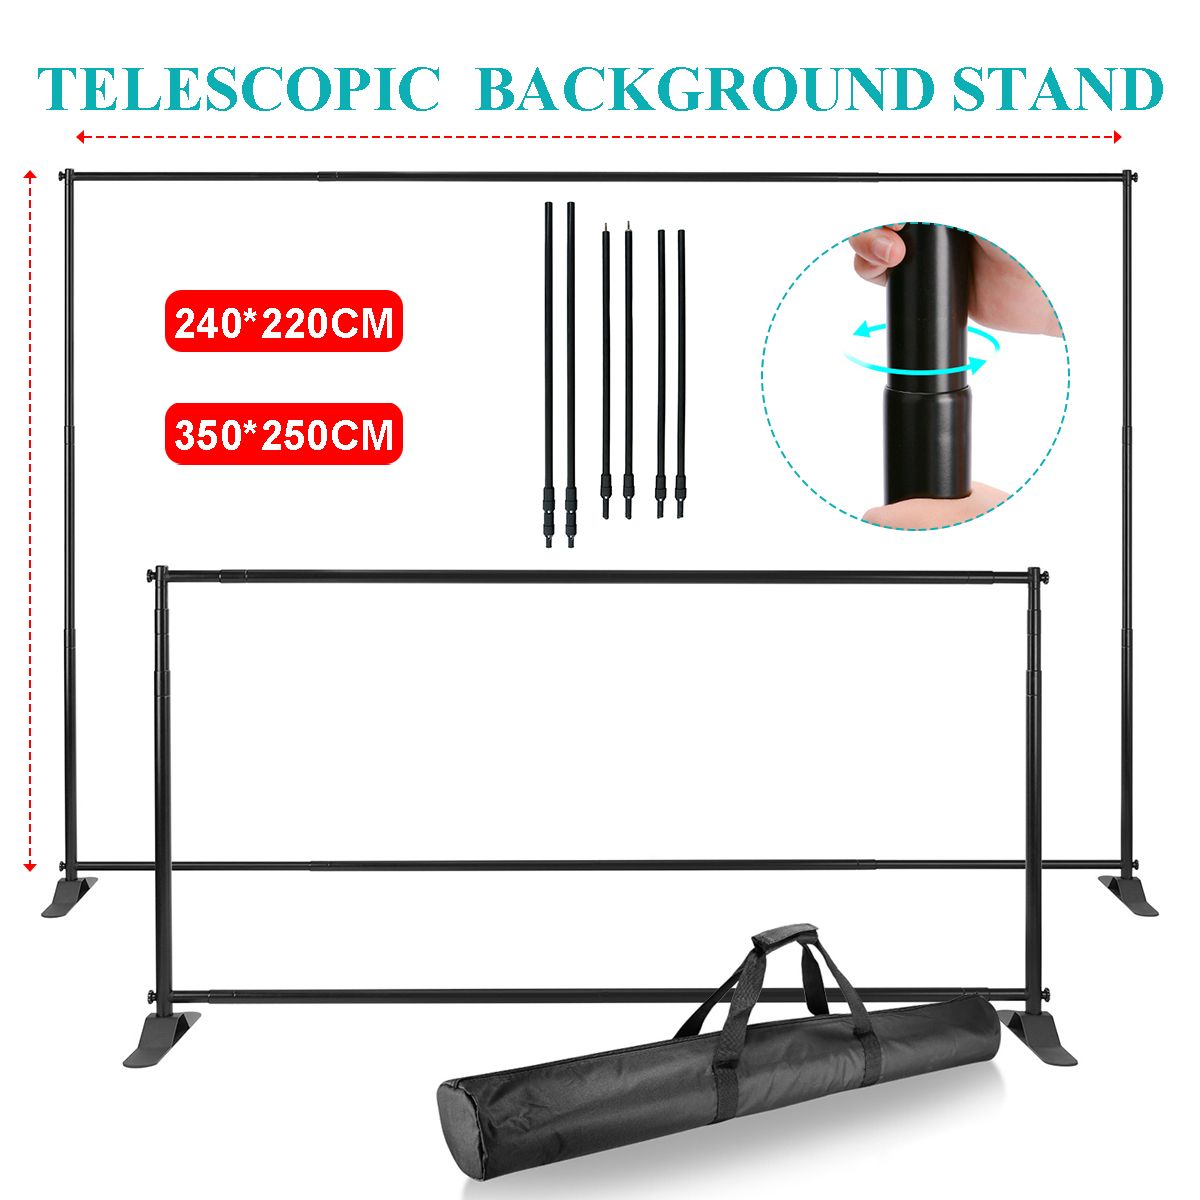 79FT-115FT-Iron-Adjustable-Telescopic-Photography-Background-Stand-Kit-with-Carrying-Bag-for-Backdro-1673294